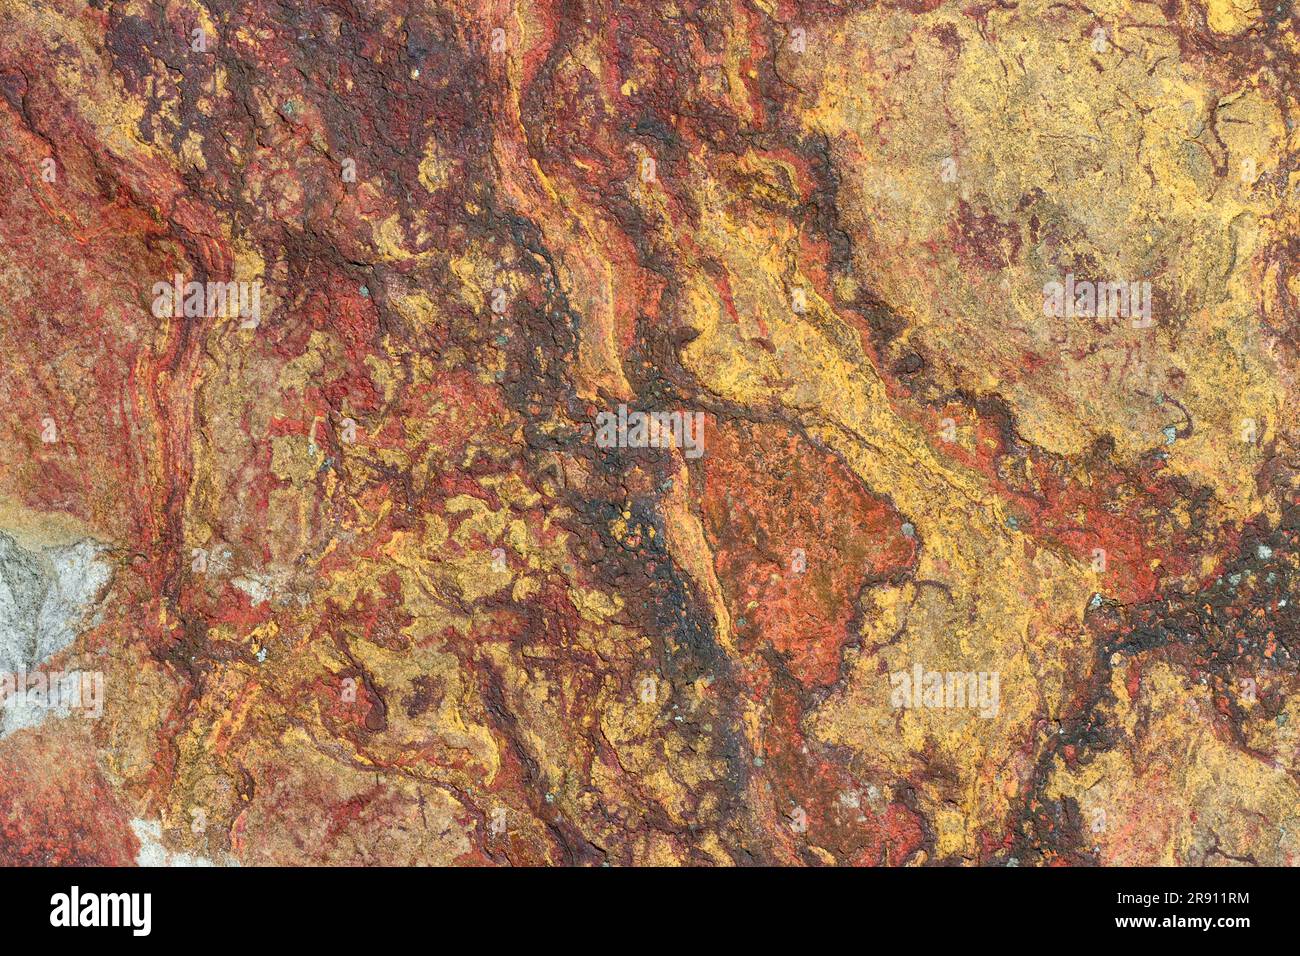 Surface of the ferruginous sandstone, abstract detail Stock Photo